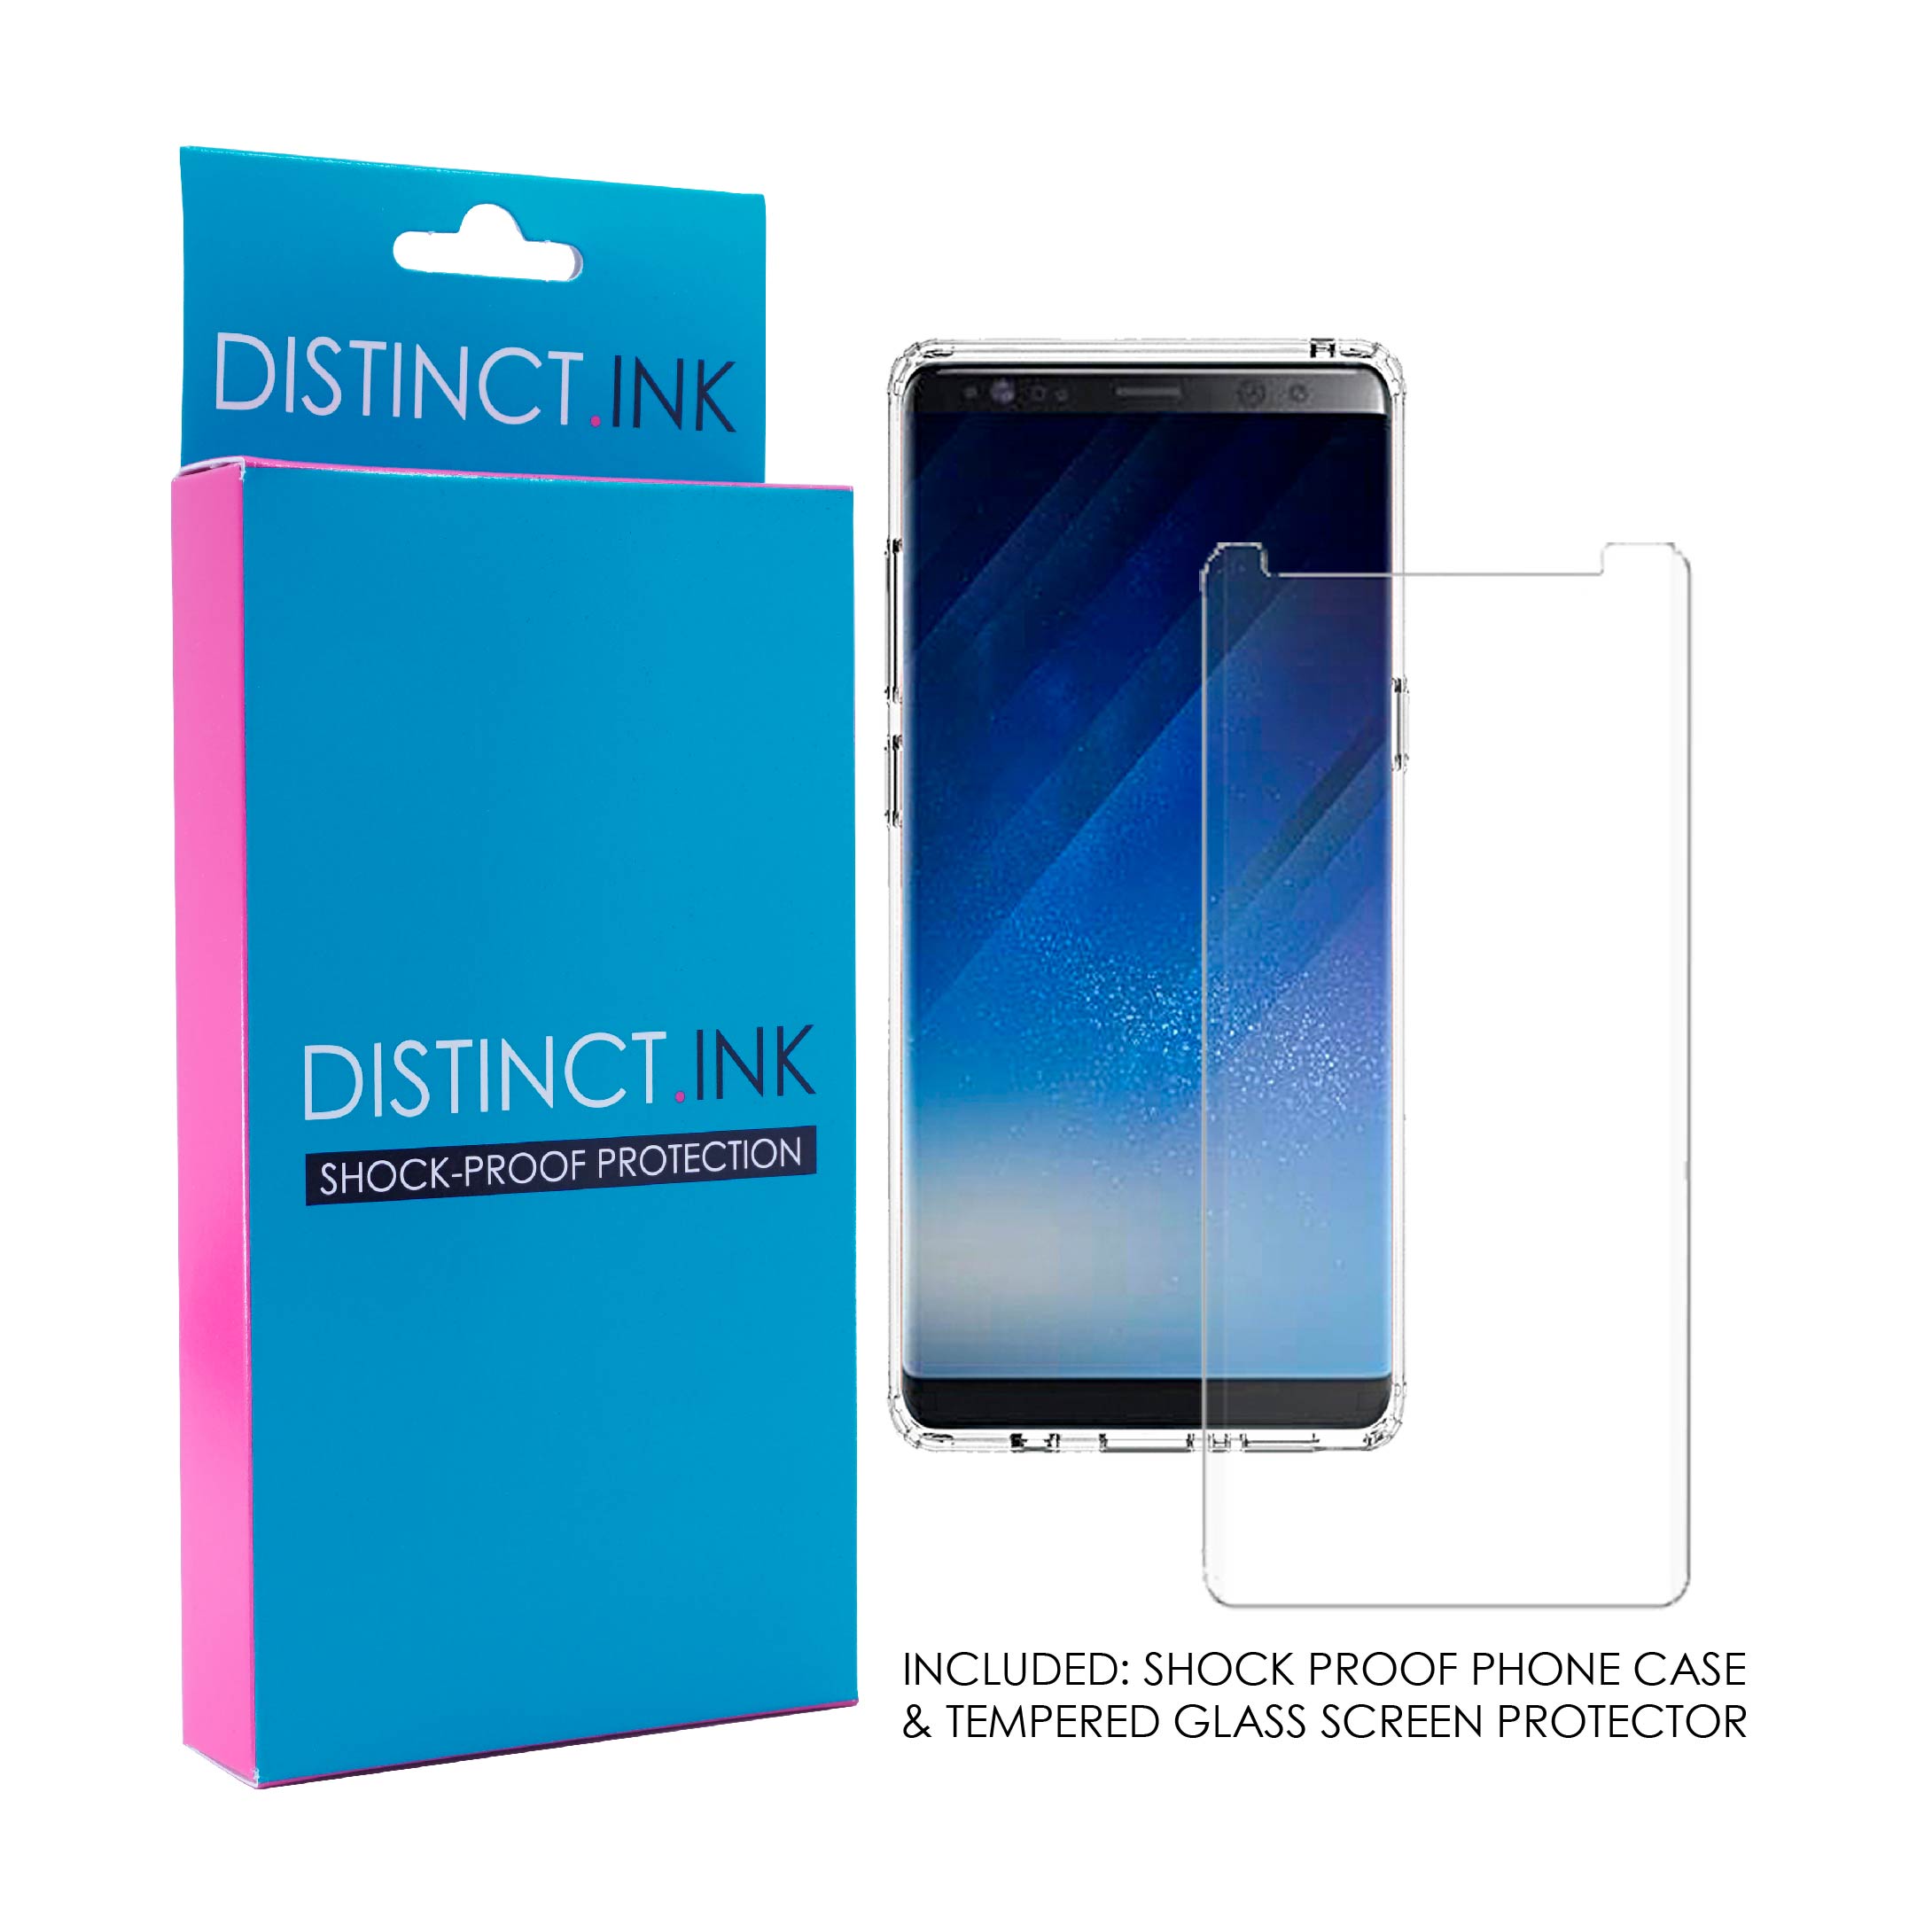 DistinctInk Clear Shockproof Hybrid Case for Samsung Galaxy Note 8 - TPU Bumper Acrylic Back Tempered Glass Screen Protector - Darling Don't Forget to Fall In Love with Yourself - image 4 of 5